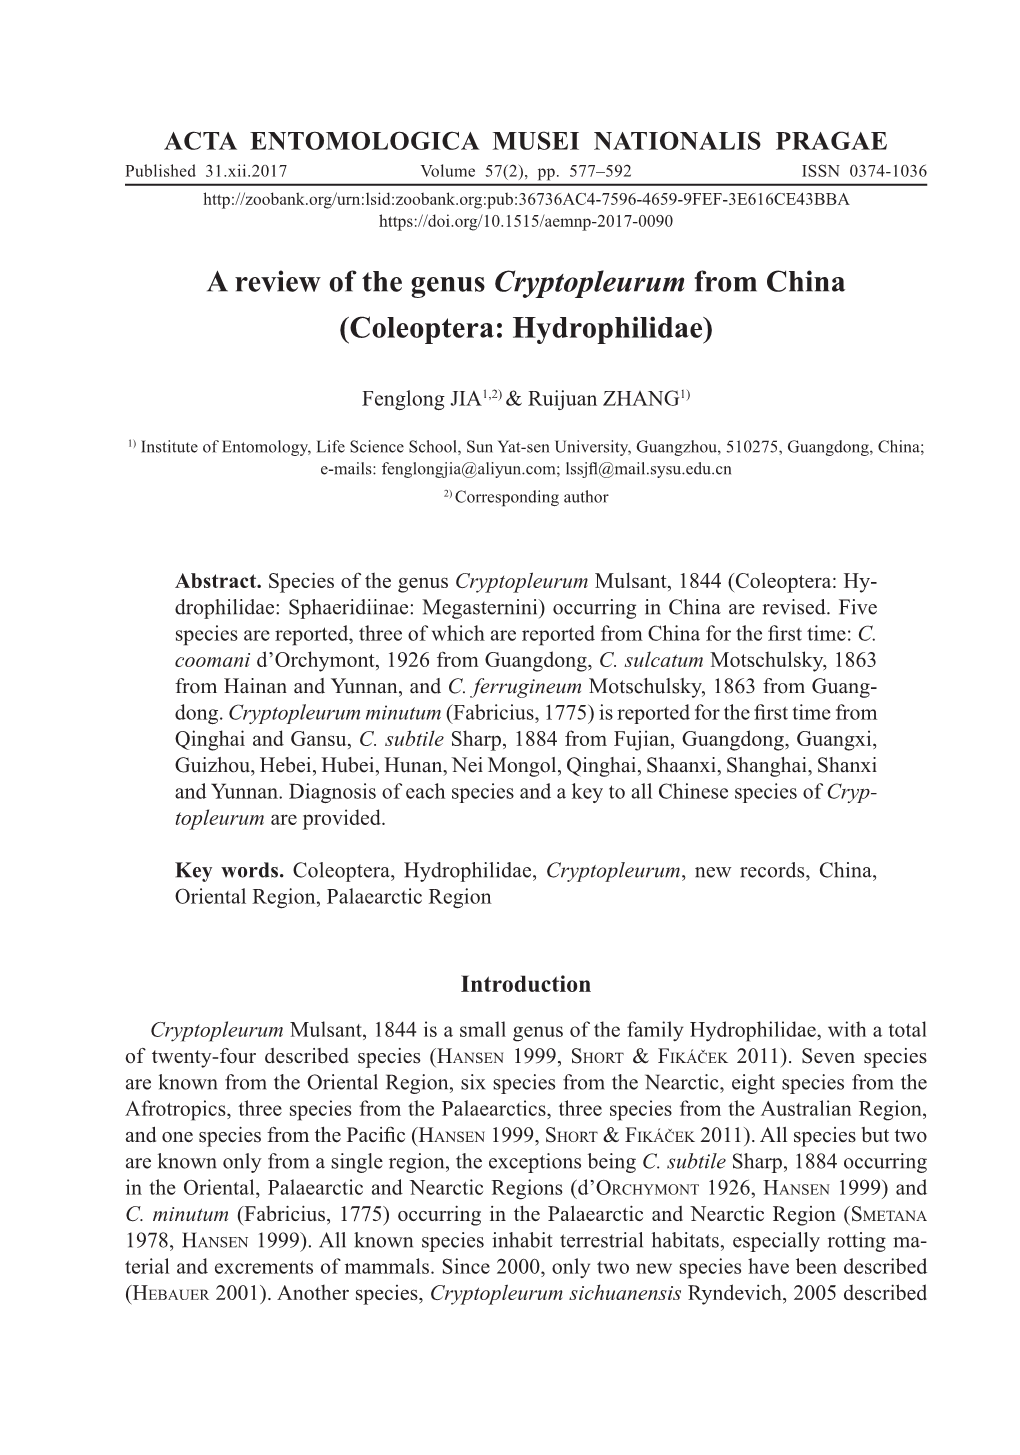 A Review of the Genus Cryptopleurum from China (Coleoptera: Hydrophilidae)